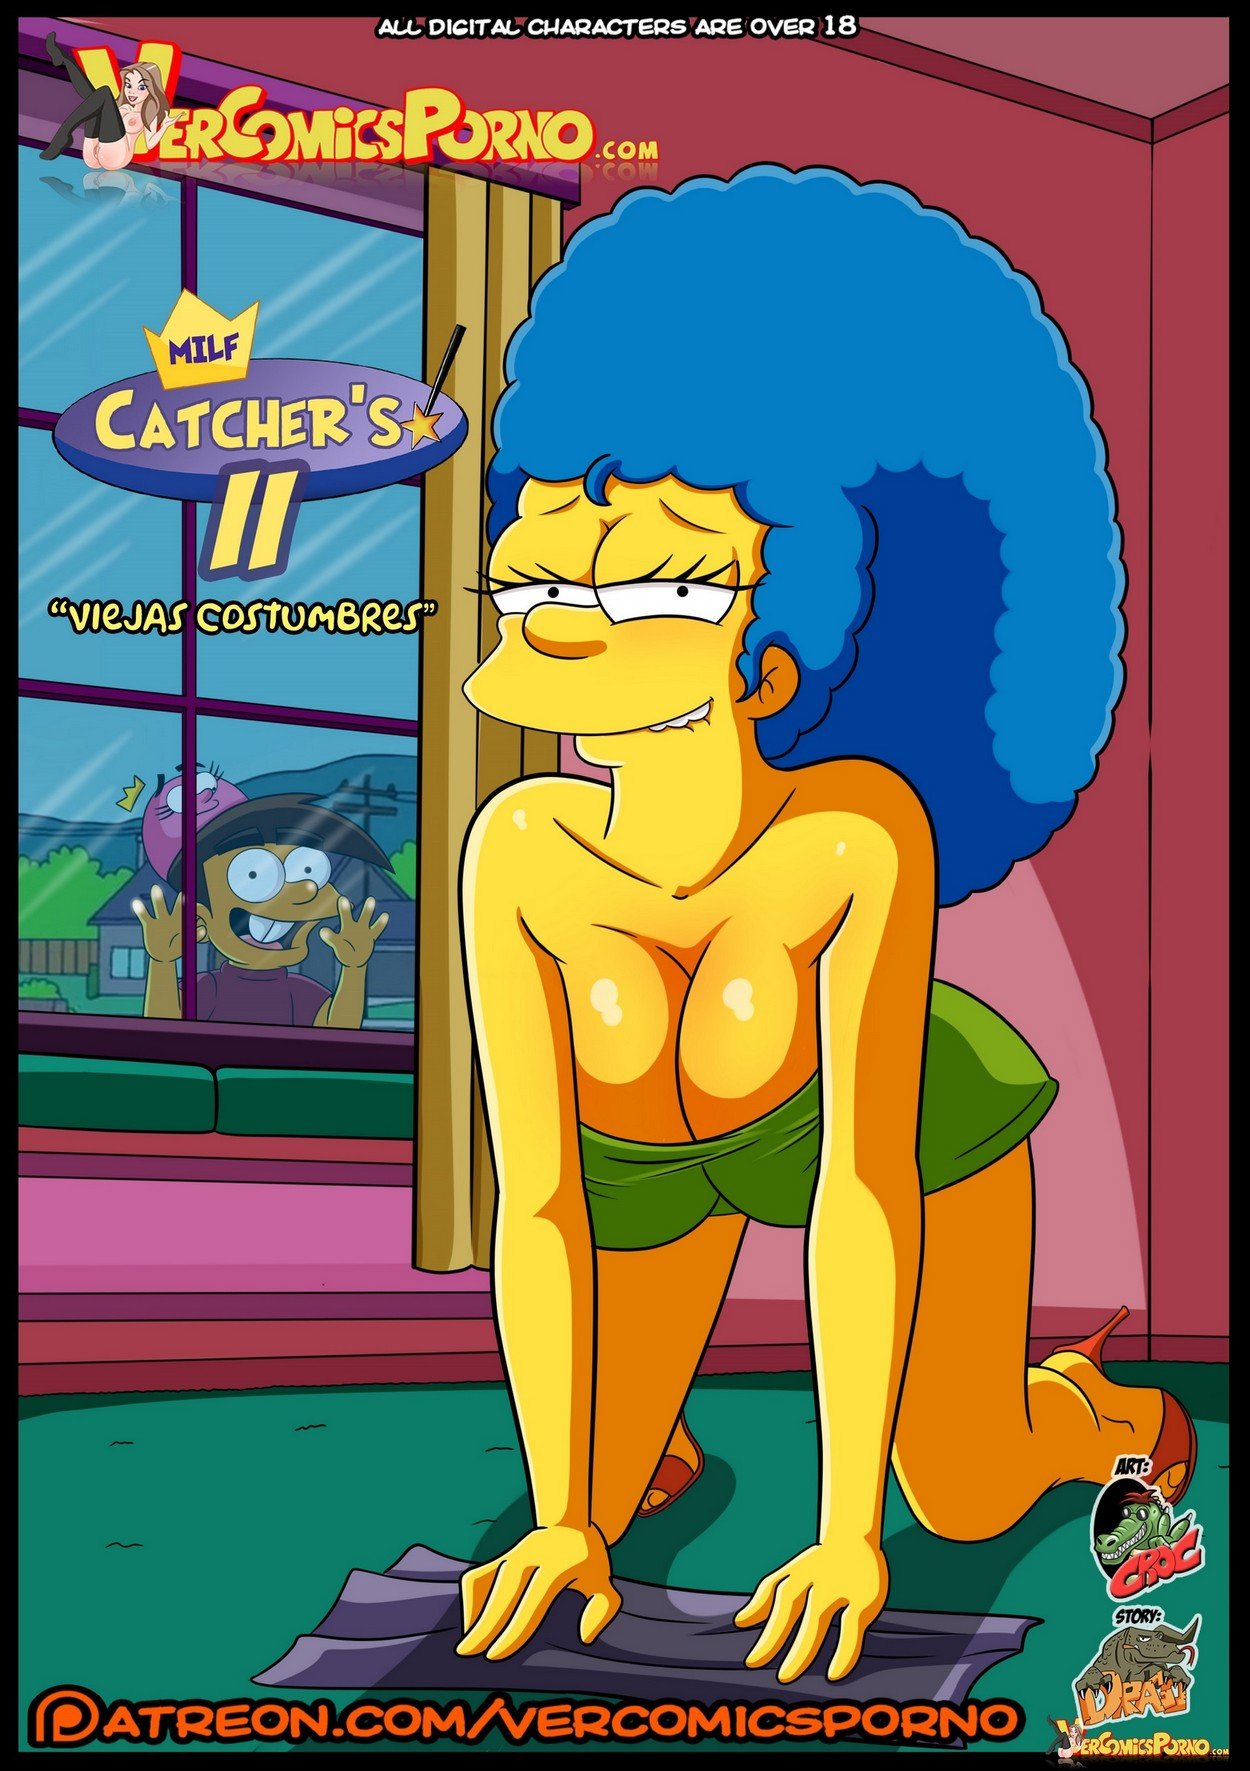 Half-Pipe recommendet Simpsons Porn - Homer fucks Marge.